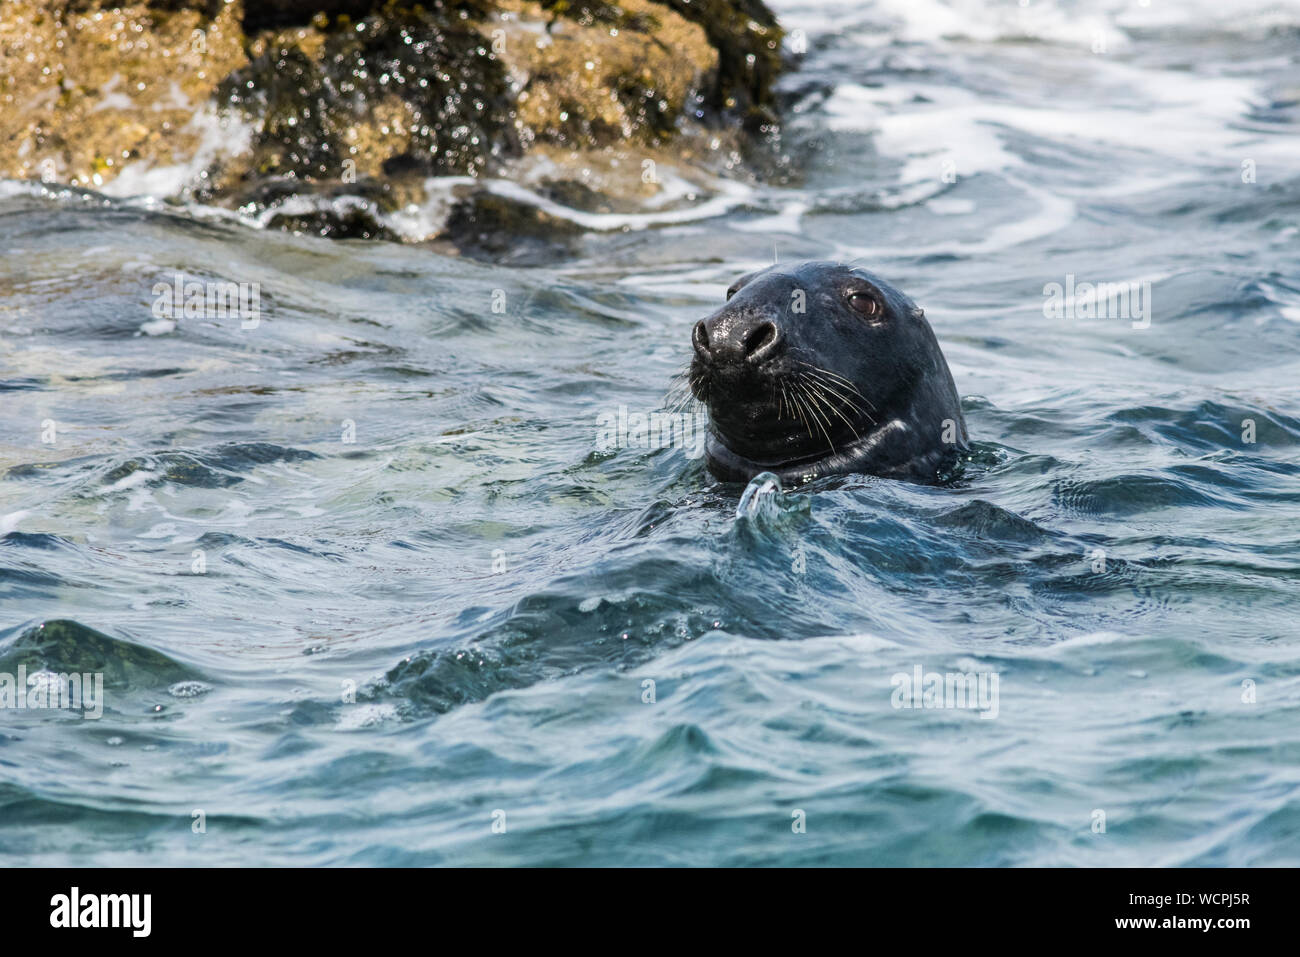 Grey seal, Isles of Scilly, head above the waves Stock Photo